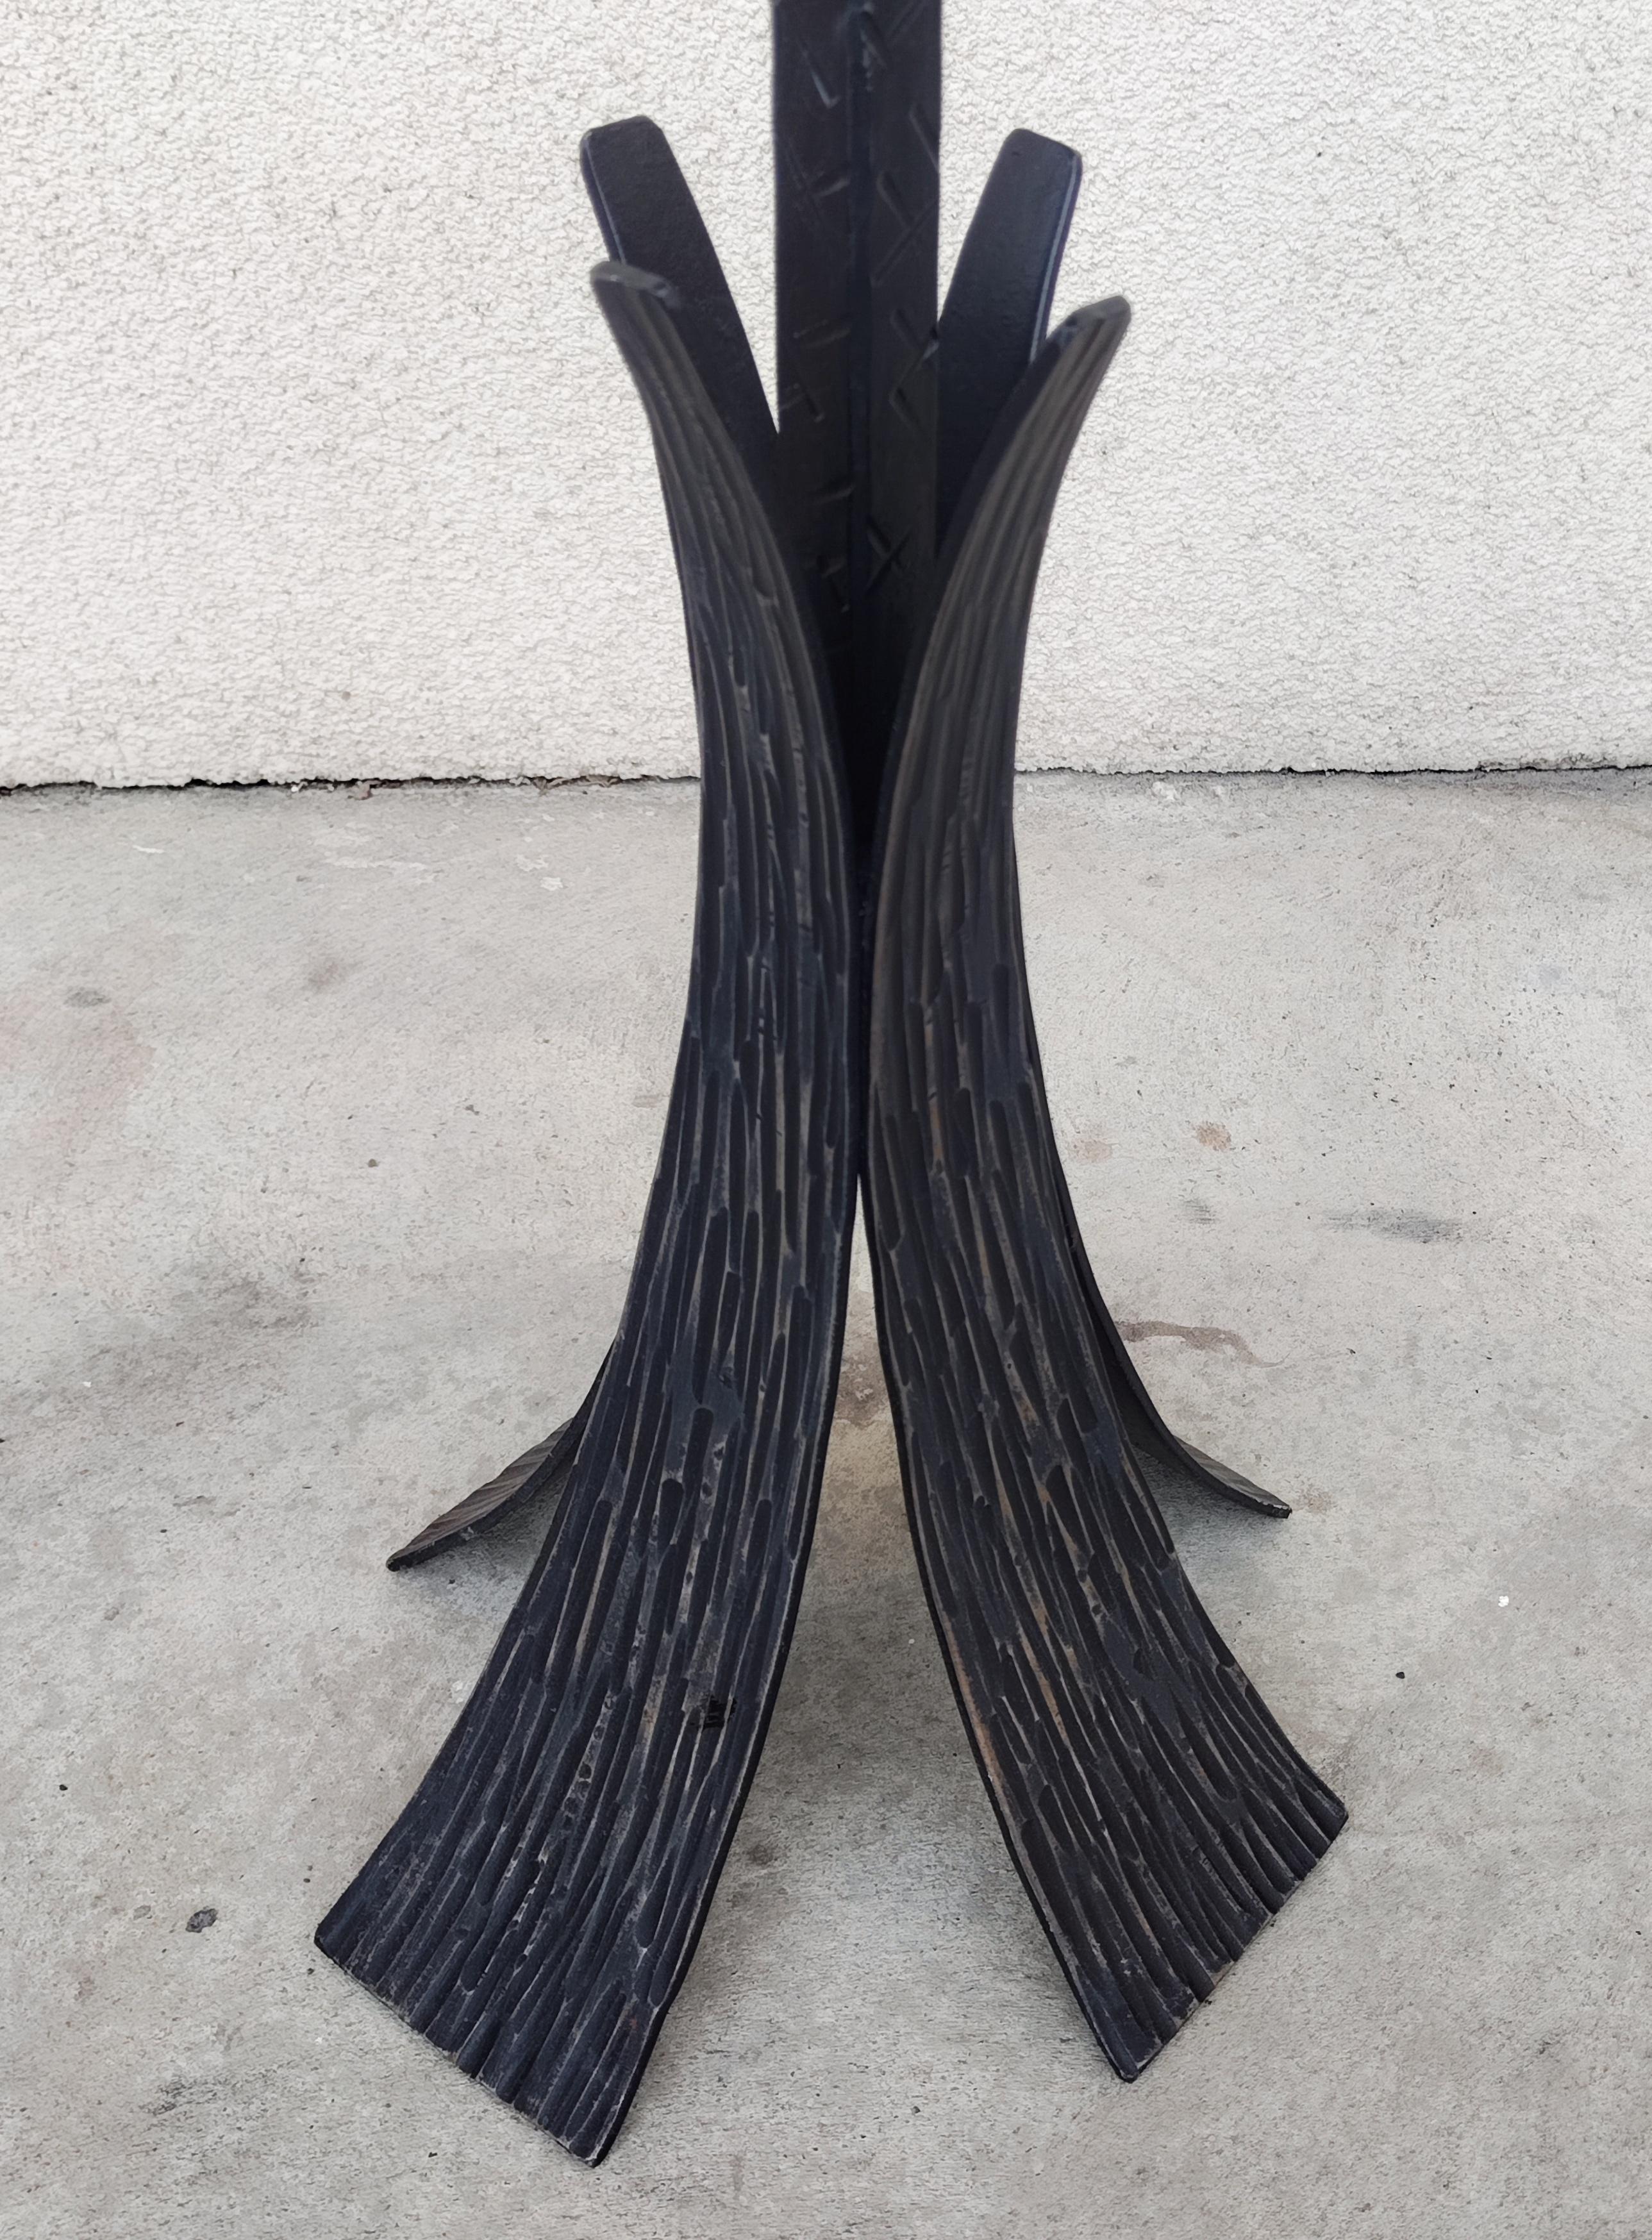 Extra Large Brutalist Candlestick Holder Done in Iron, West Germany, 1970s For Sale 4